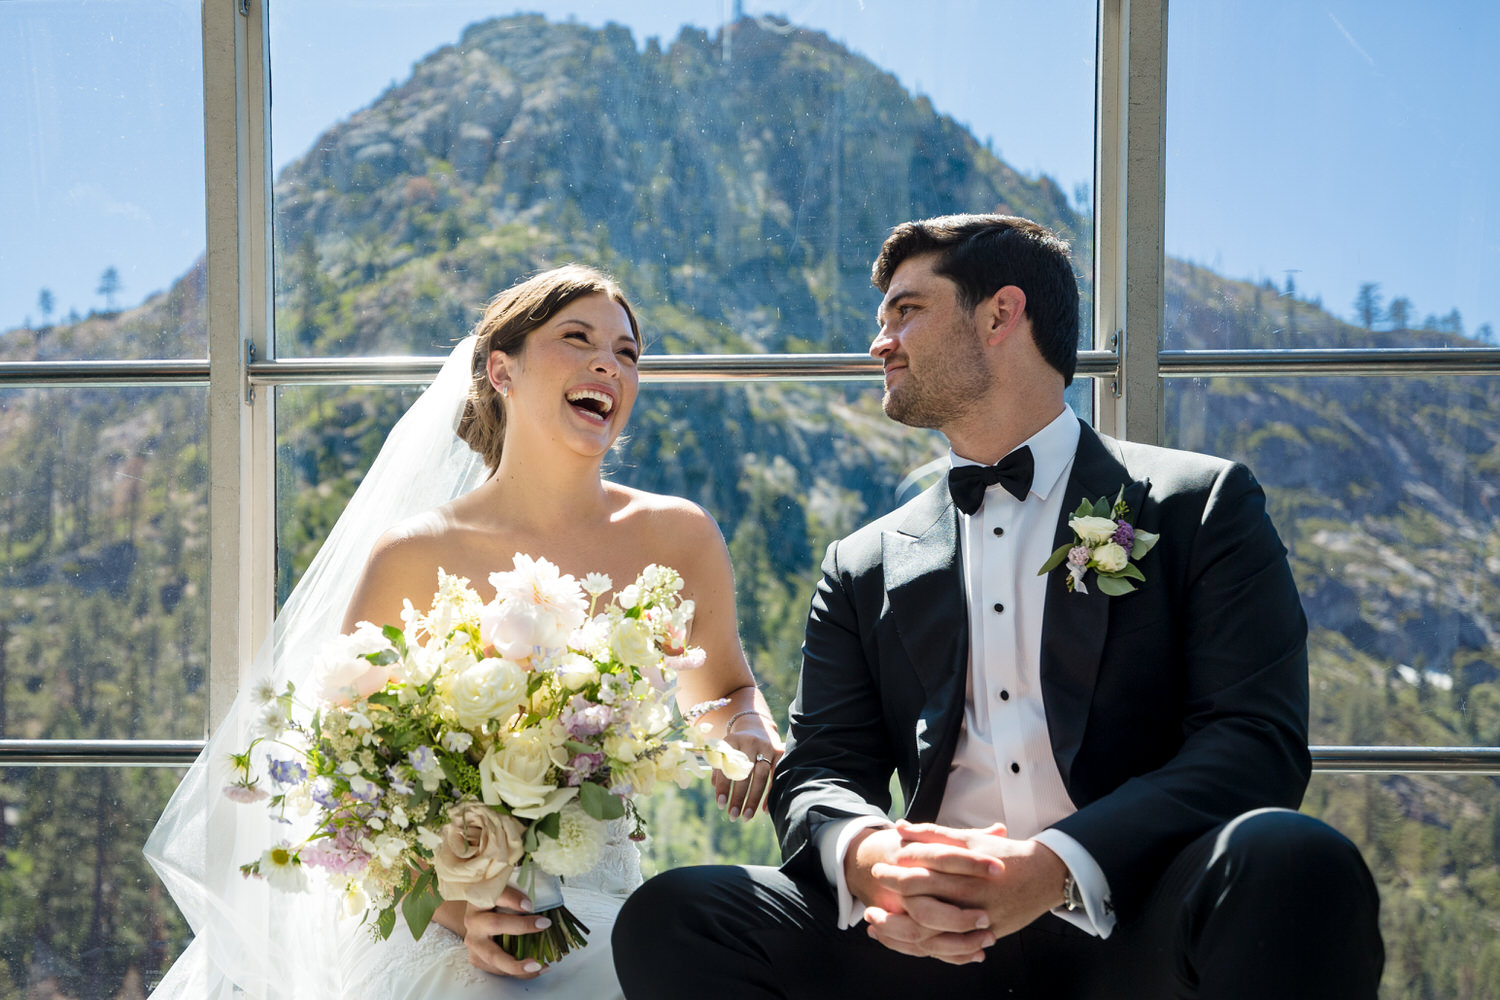 A candid moment between the bride and groom while riding the Palisades Tahoe Aerial Tram to their wedding.